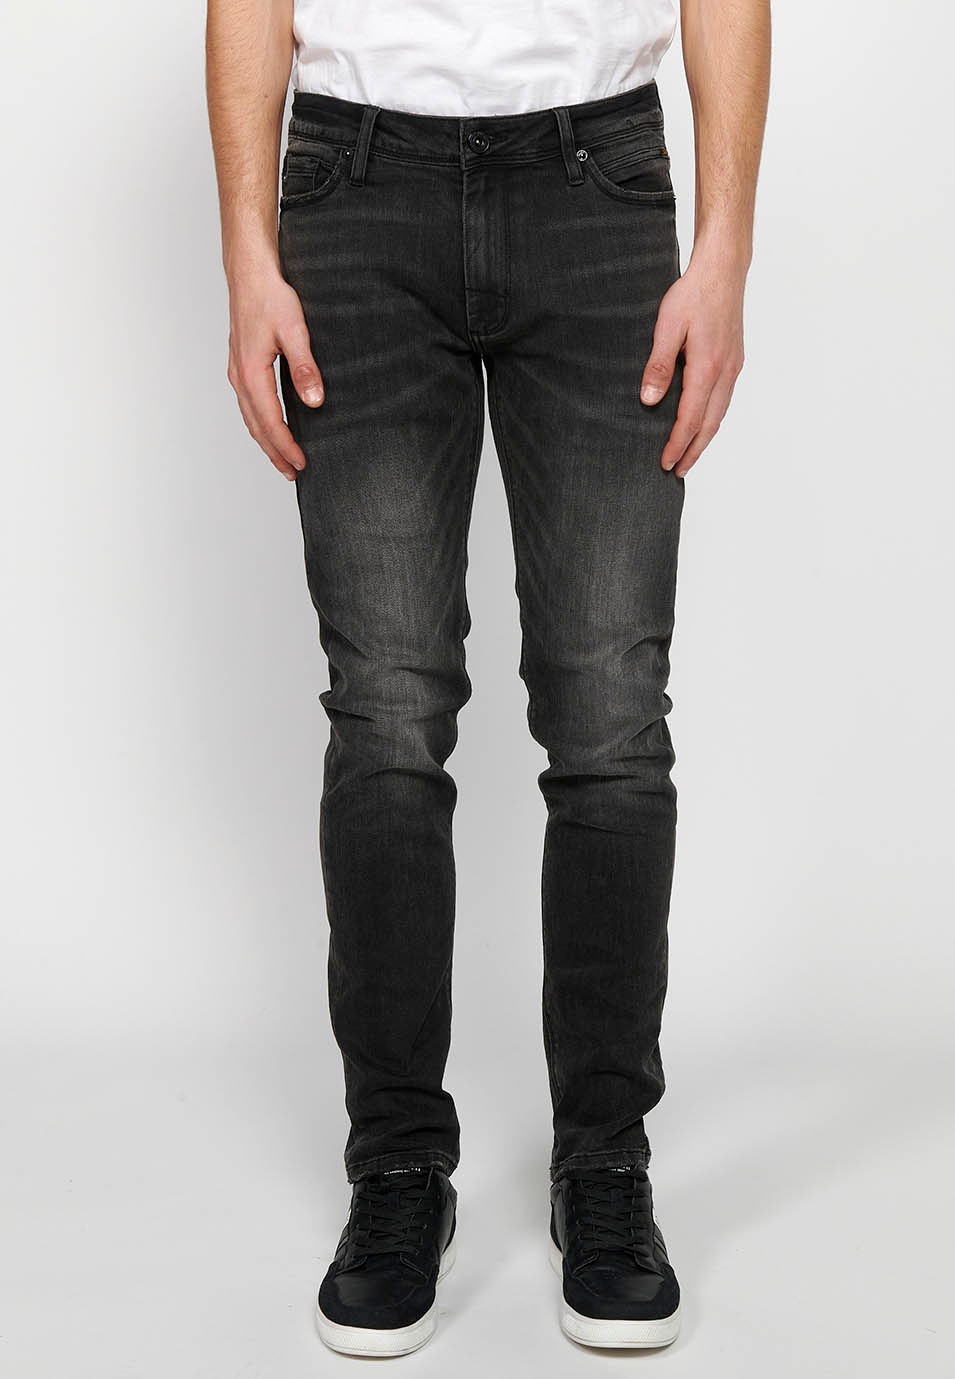 Regular fit long straight jeans with zipper and button front closure in Black Denim for Men 4